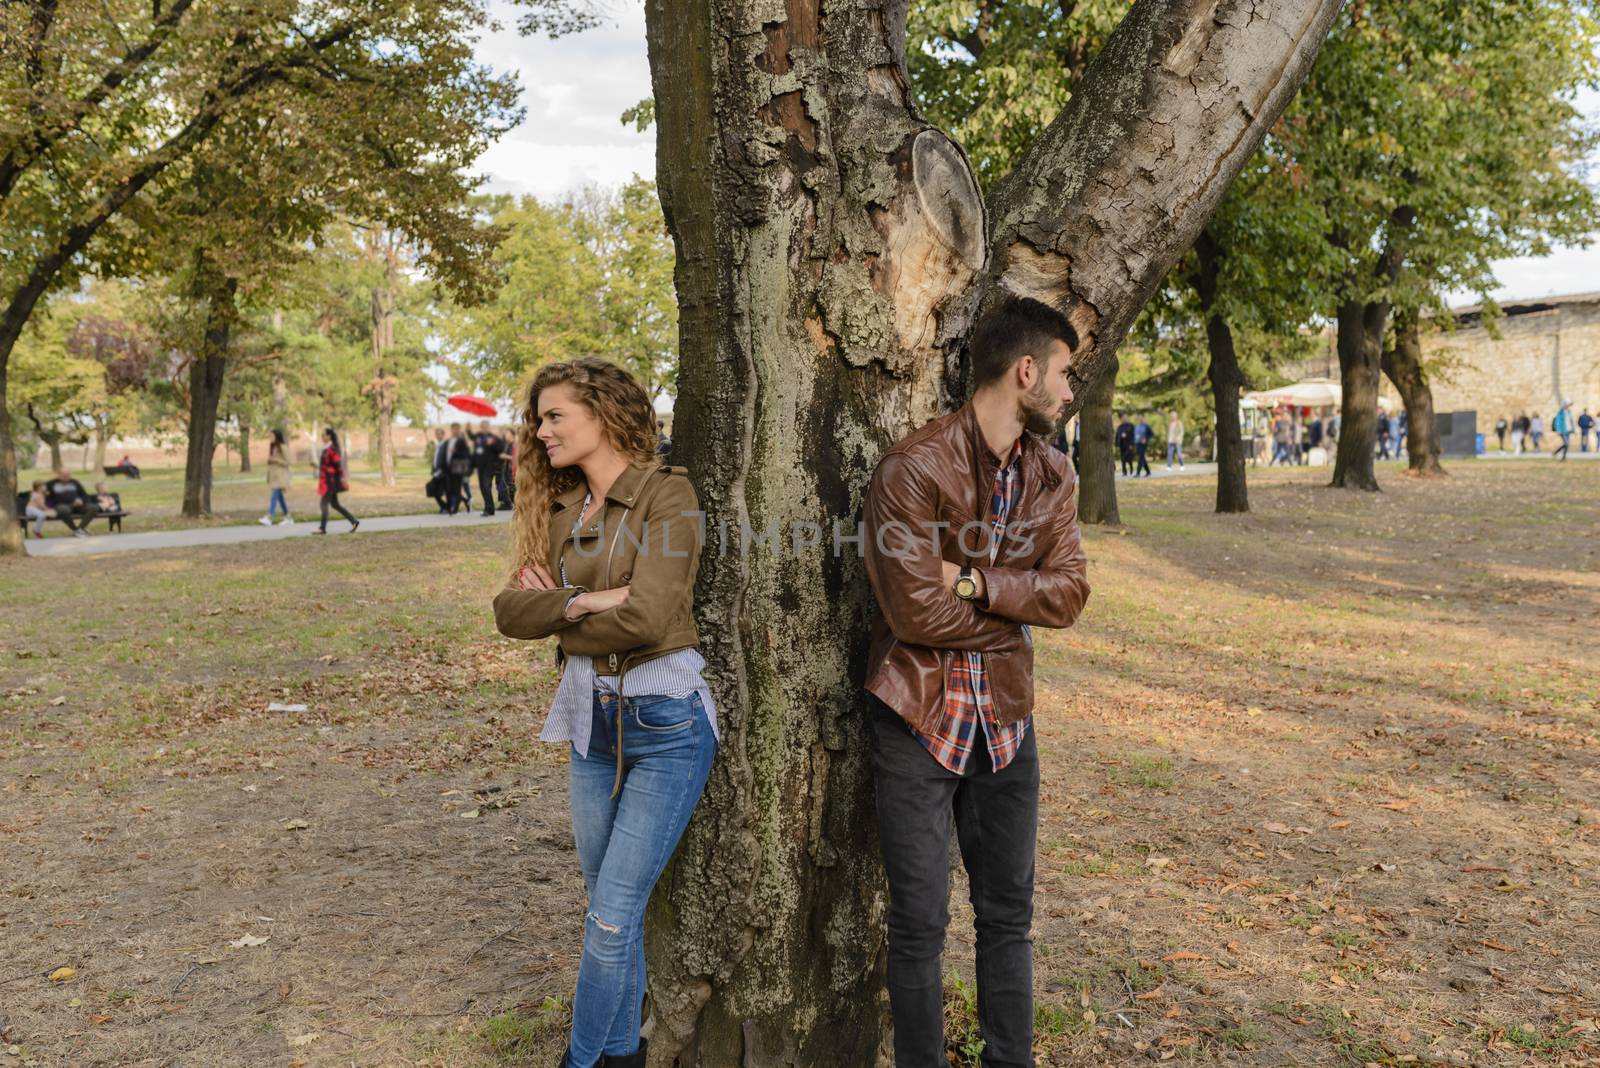 Young couple ignoring each other in the public park by VeraAgency